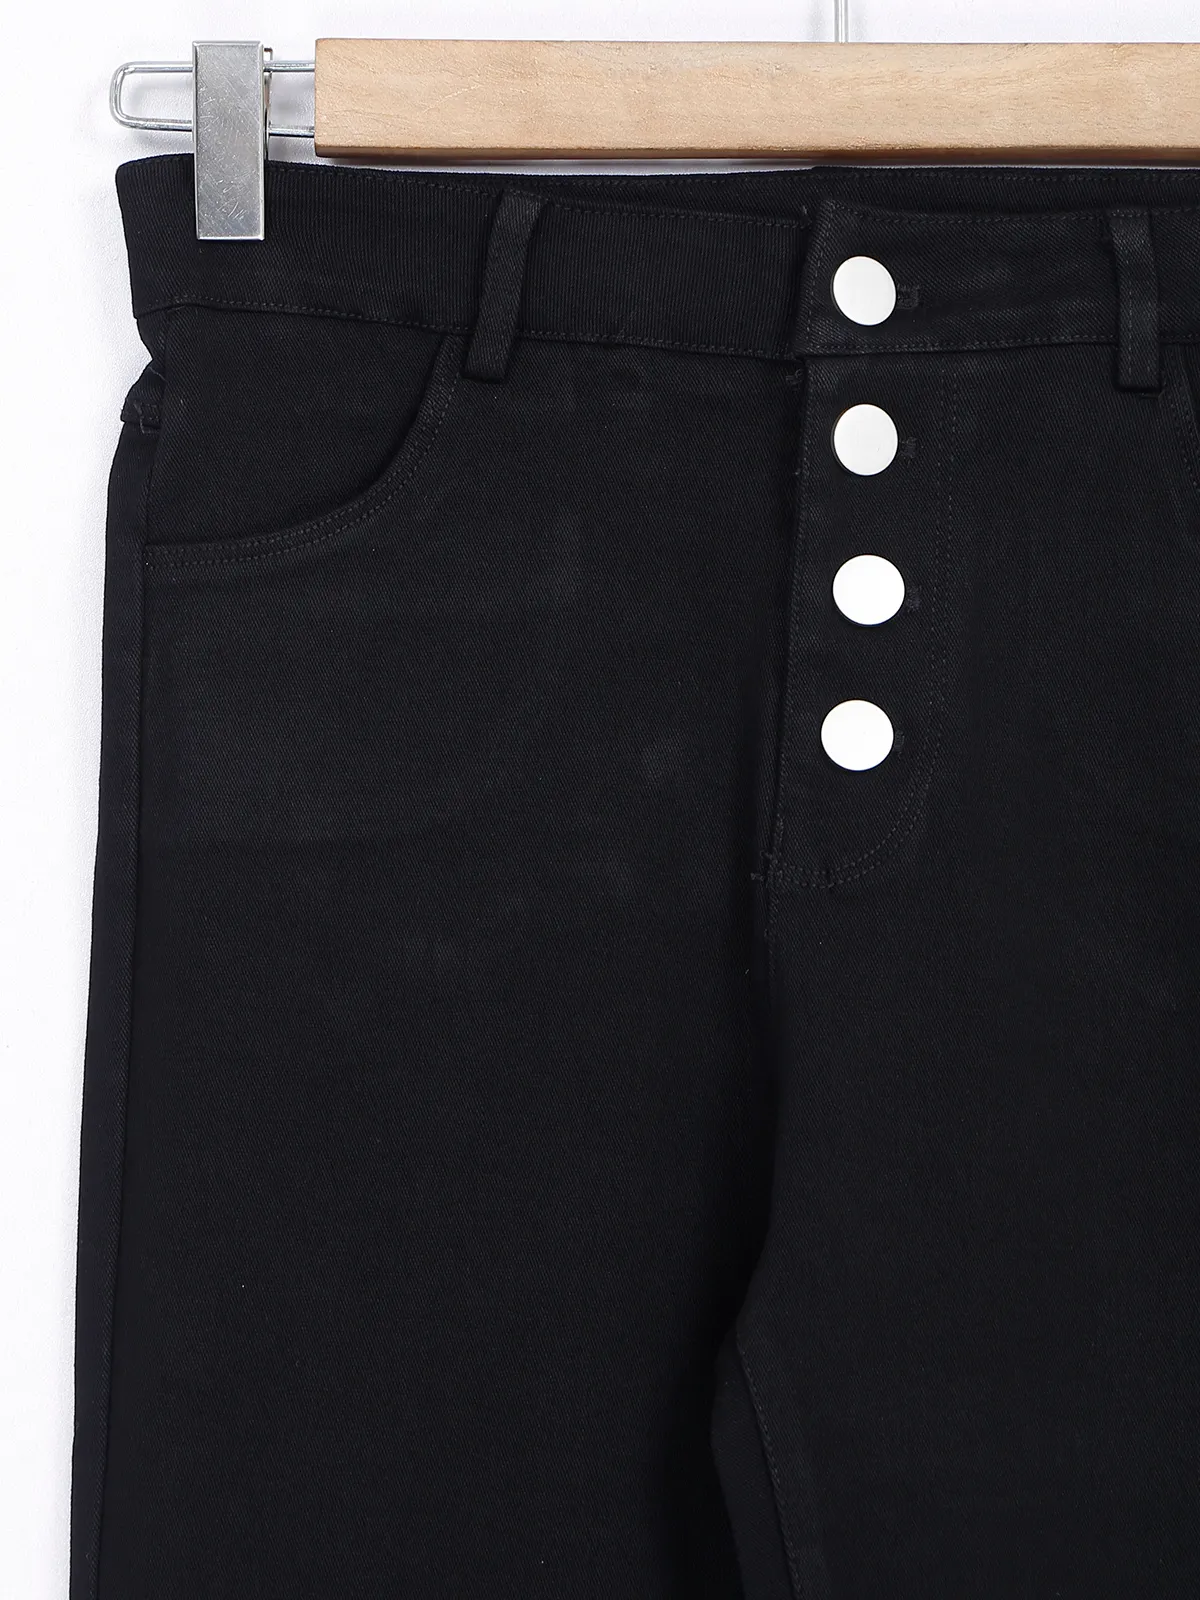 Black solid bootcut jeans